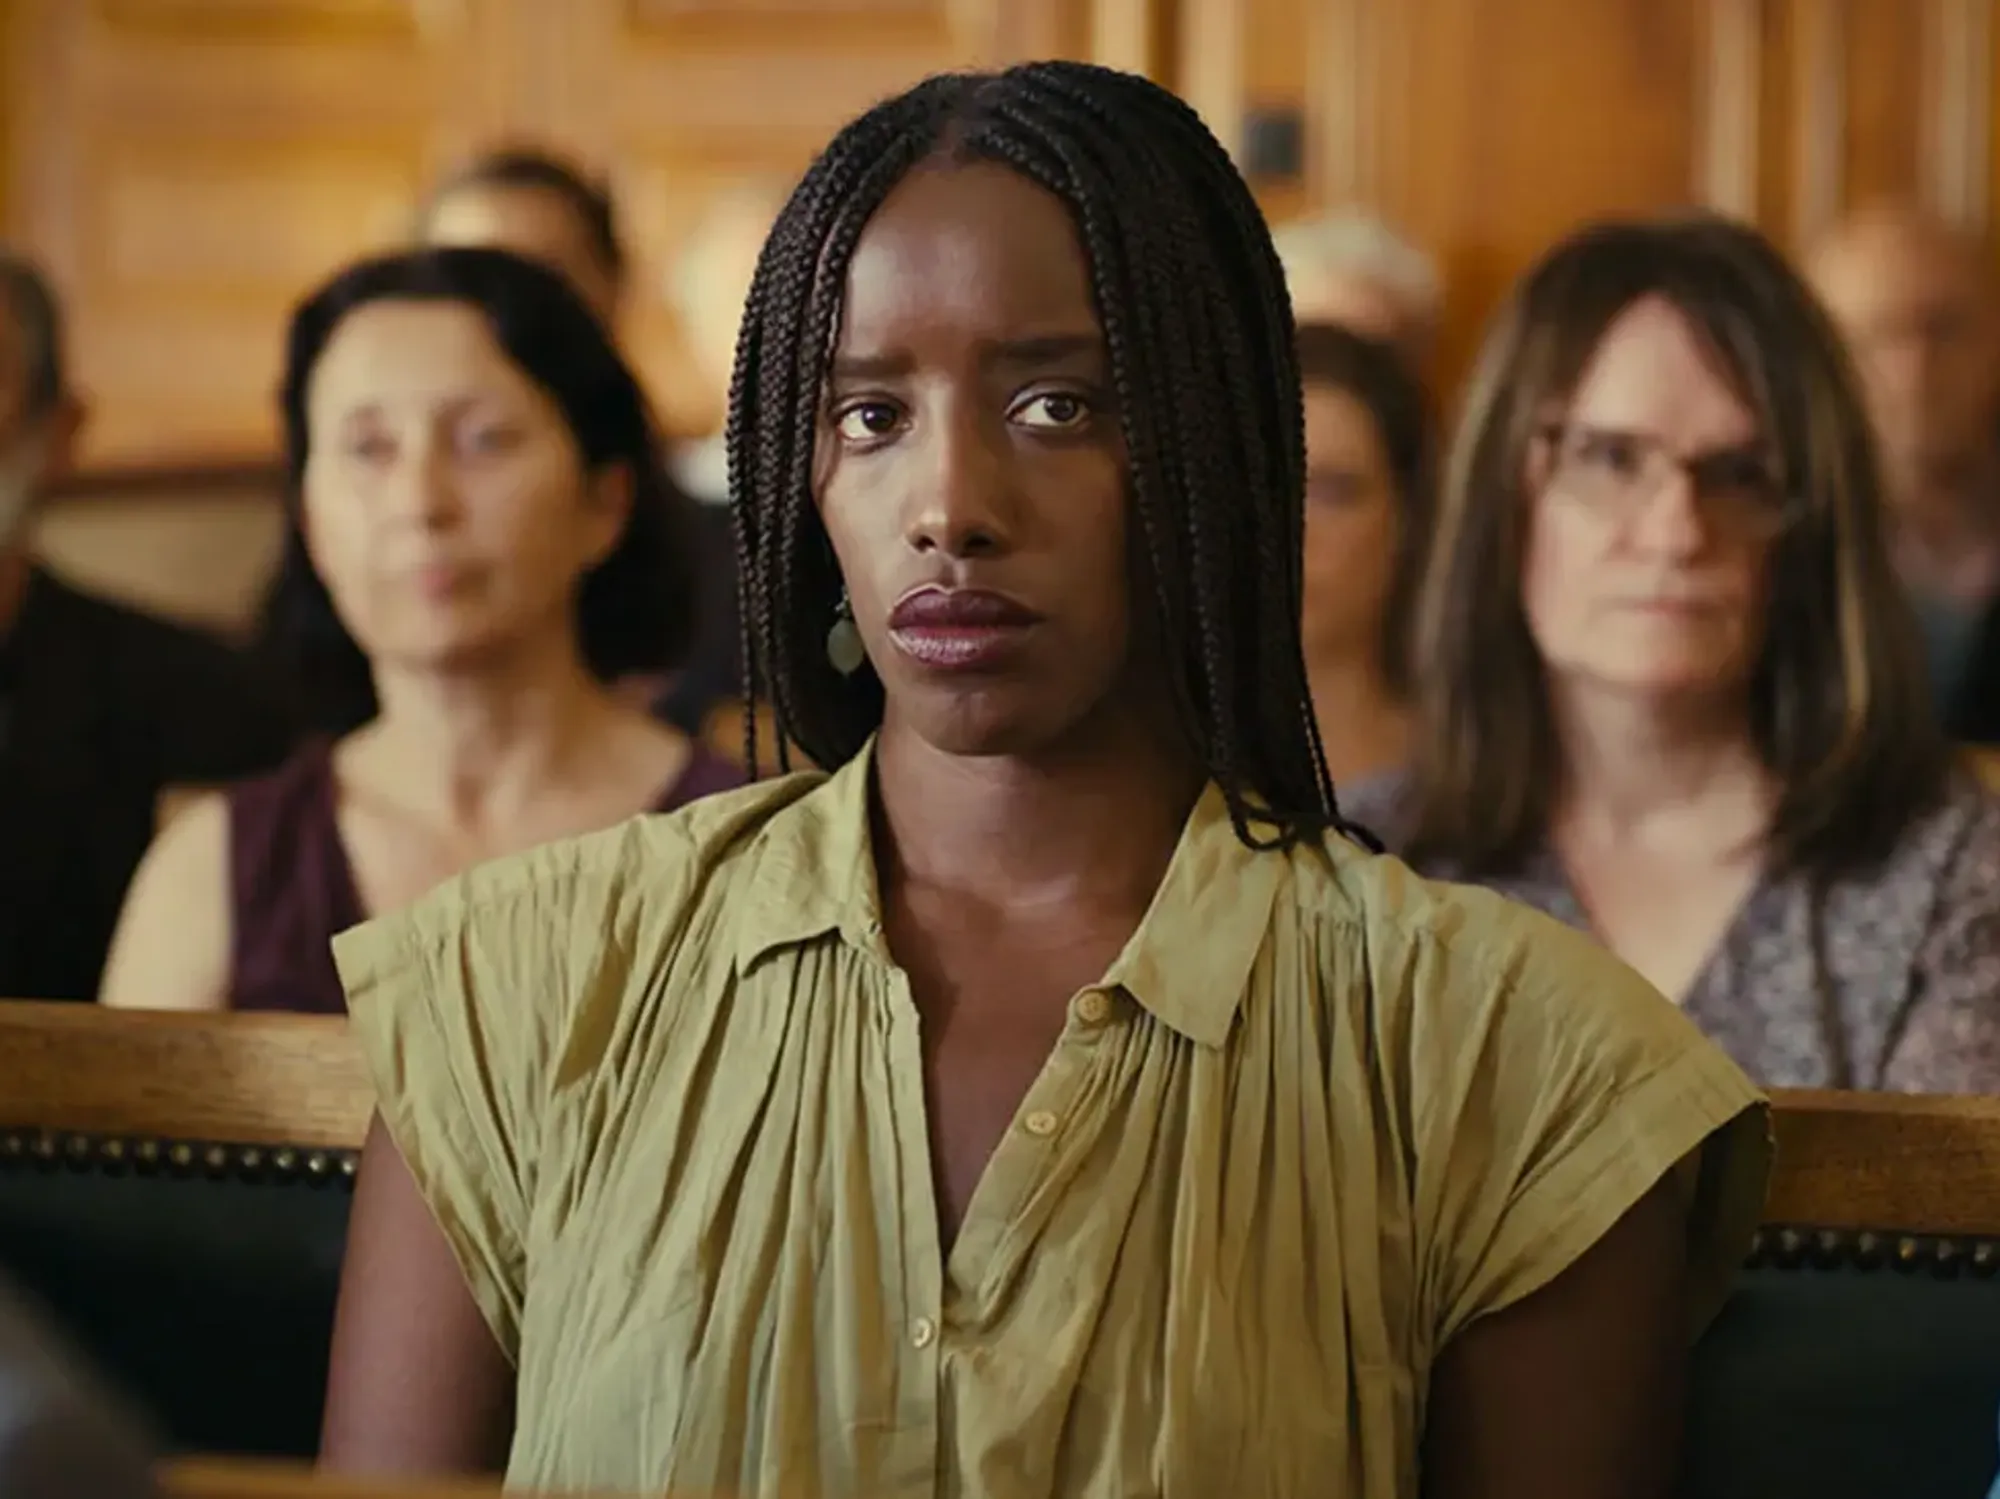 Alice Diop's 'Saint Omer' Will Debut in January